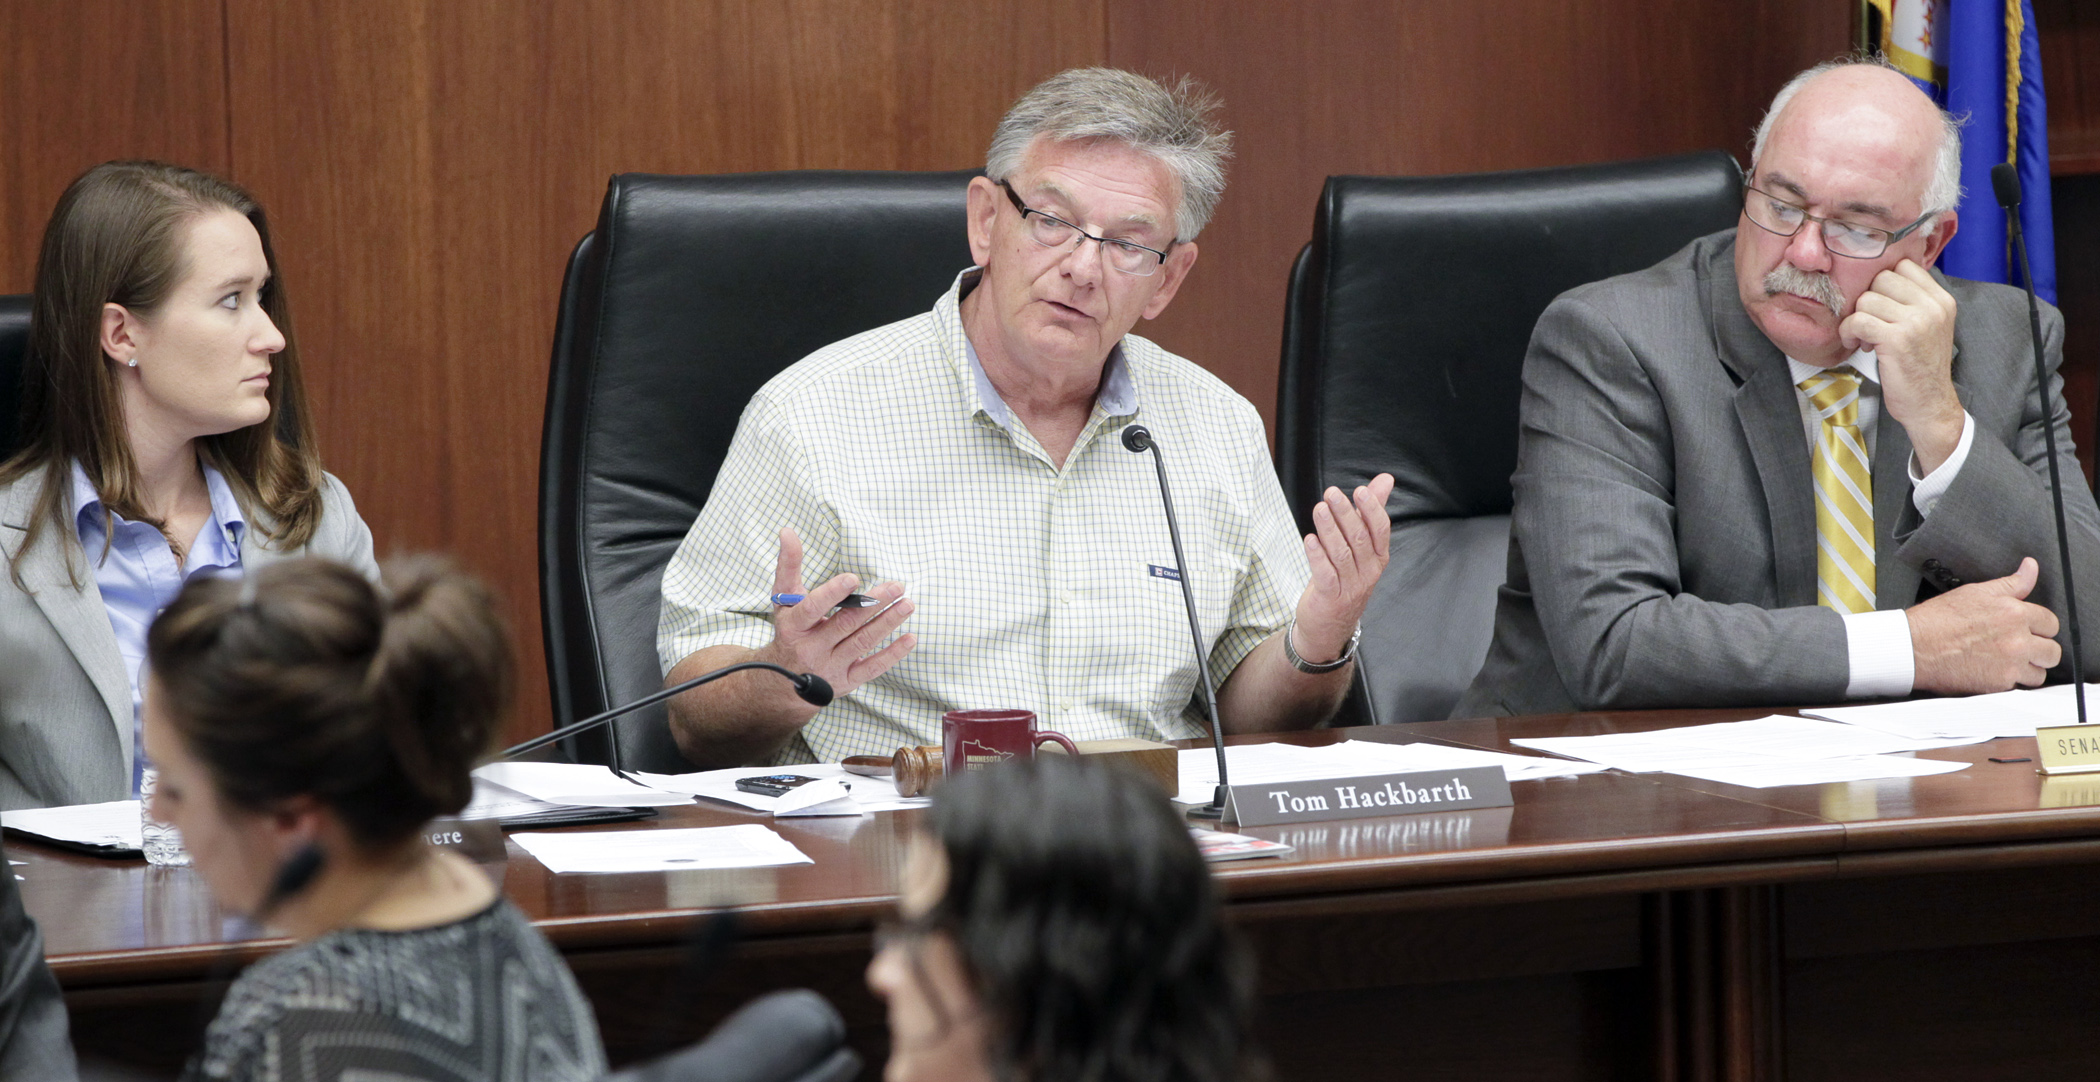 Rep. Tom Hackbarth, center, co-chair of the Legislative Working Group on Mille Lacs Lake, comments during the panel's third meeting Aug. 13. Photo by Paul Battaglia.